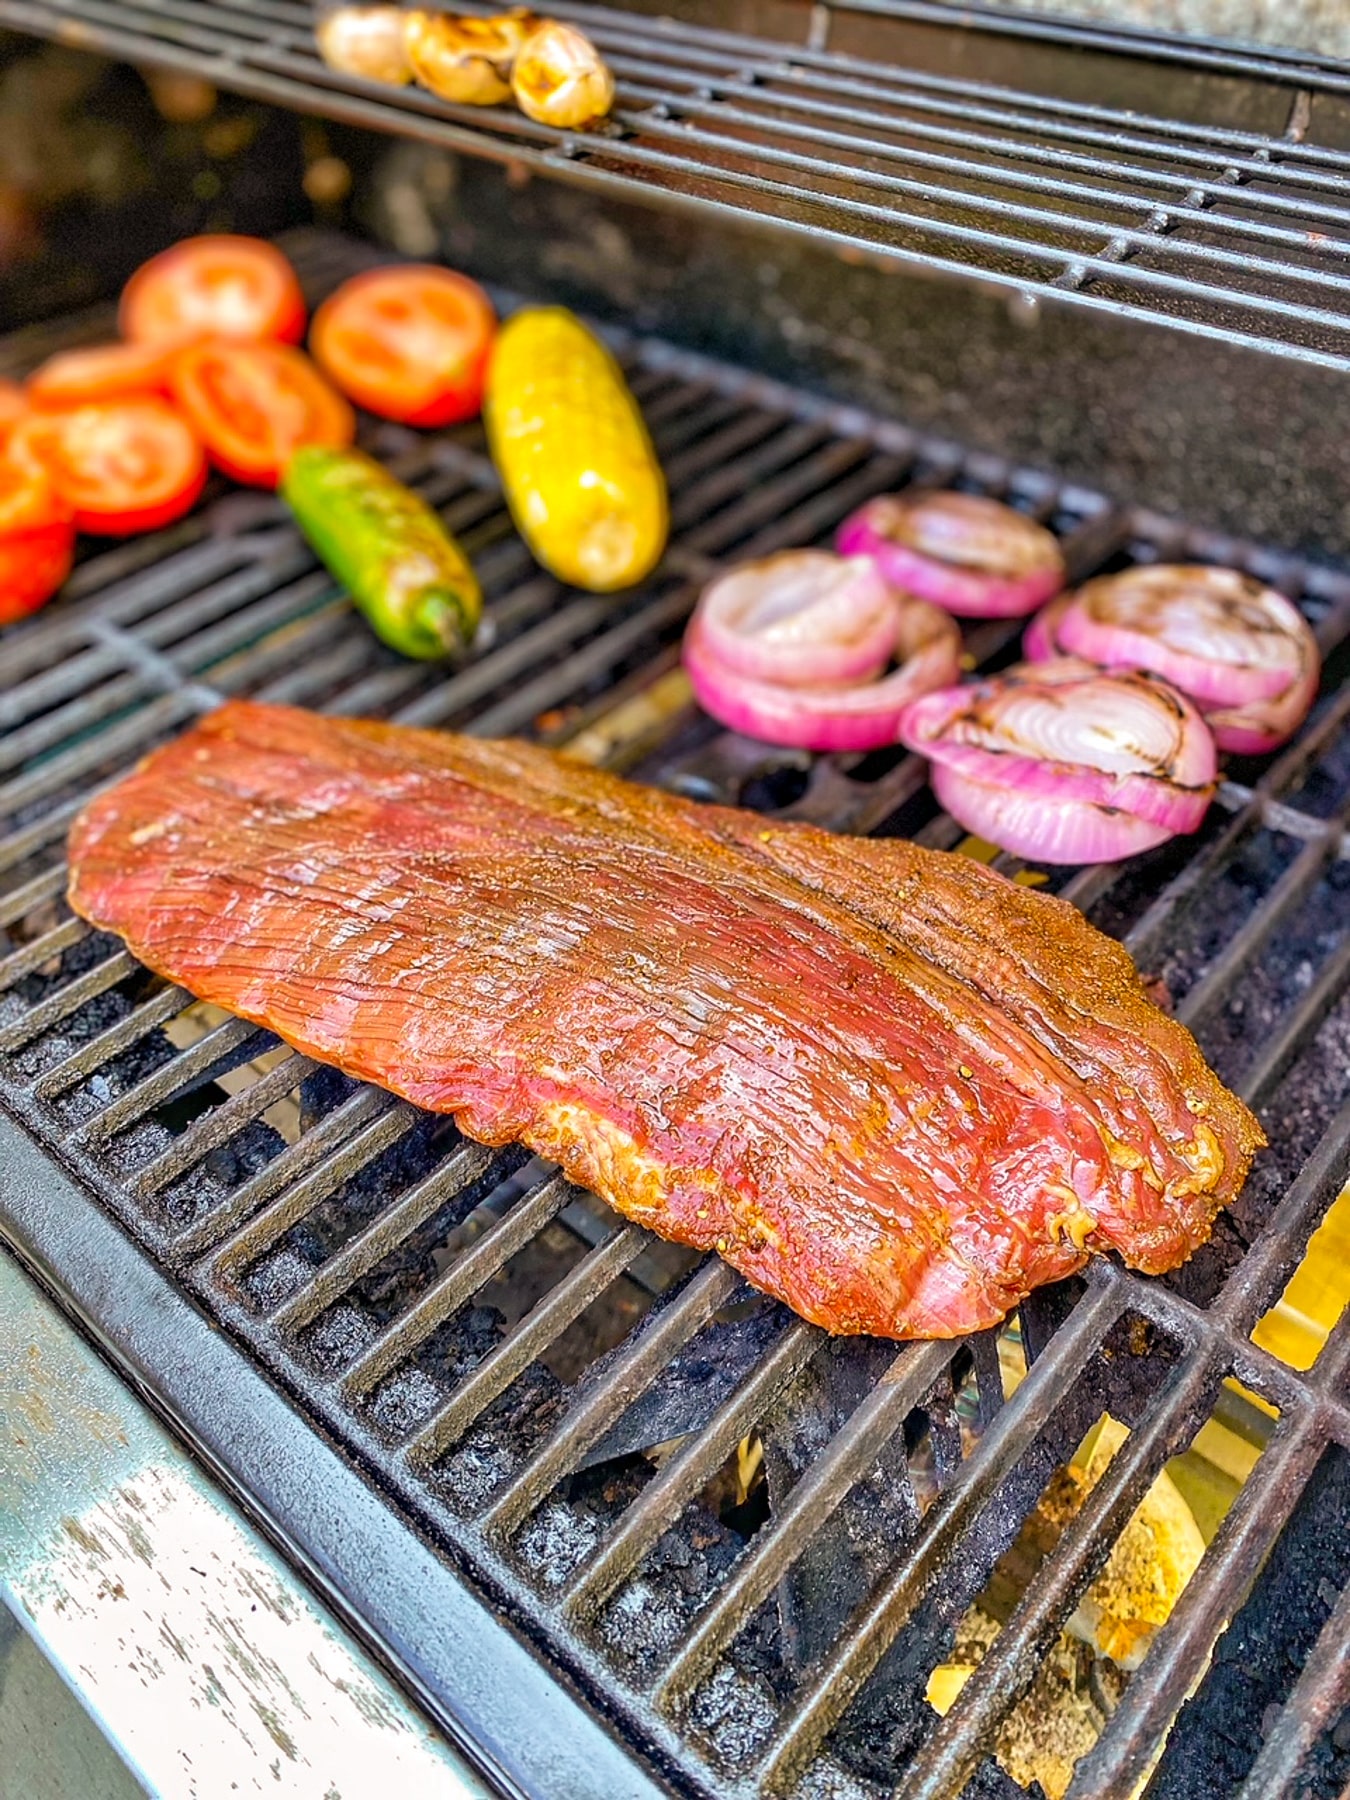 Flank steak before turning on the grill.